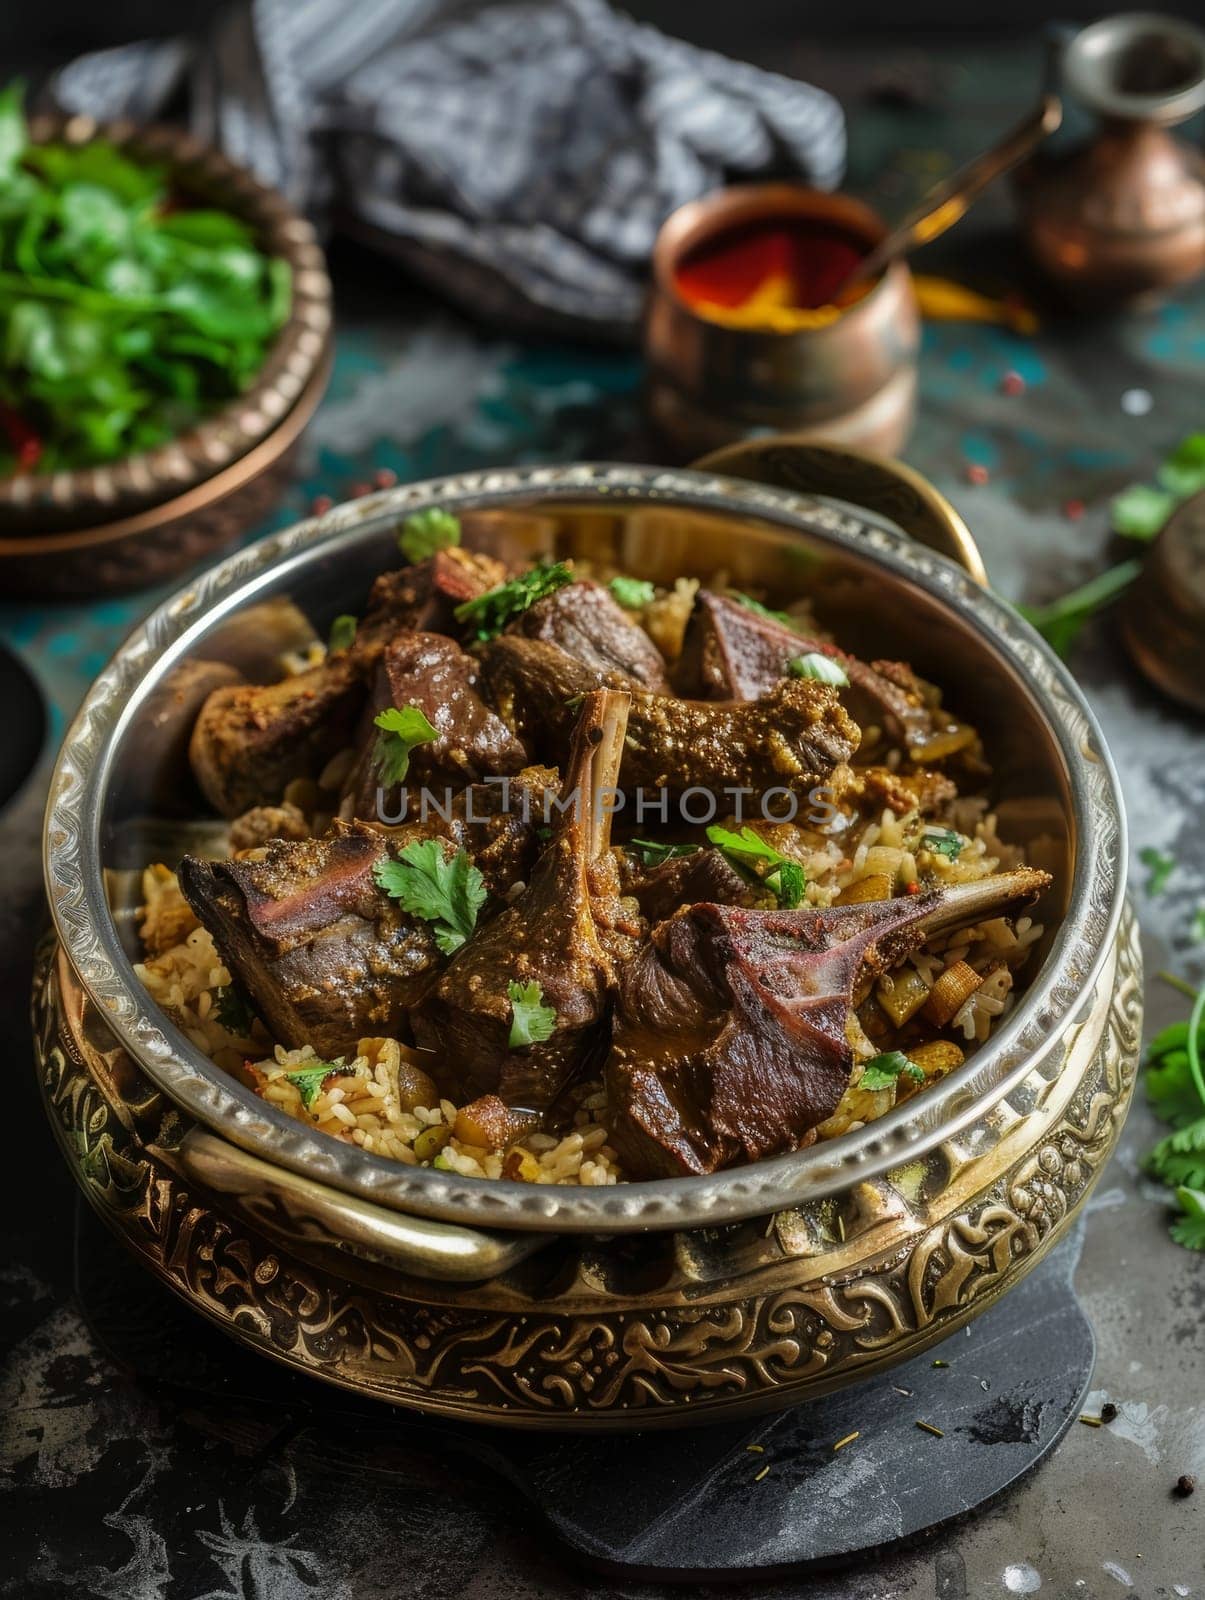 Omani shuwa, a traditional slow-roasted lamb dish marinated in a rich blend of Middle Eastern spices, served in an authentic earthenware serving pot. This savory, tender meat dish of Oman. by sfinks